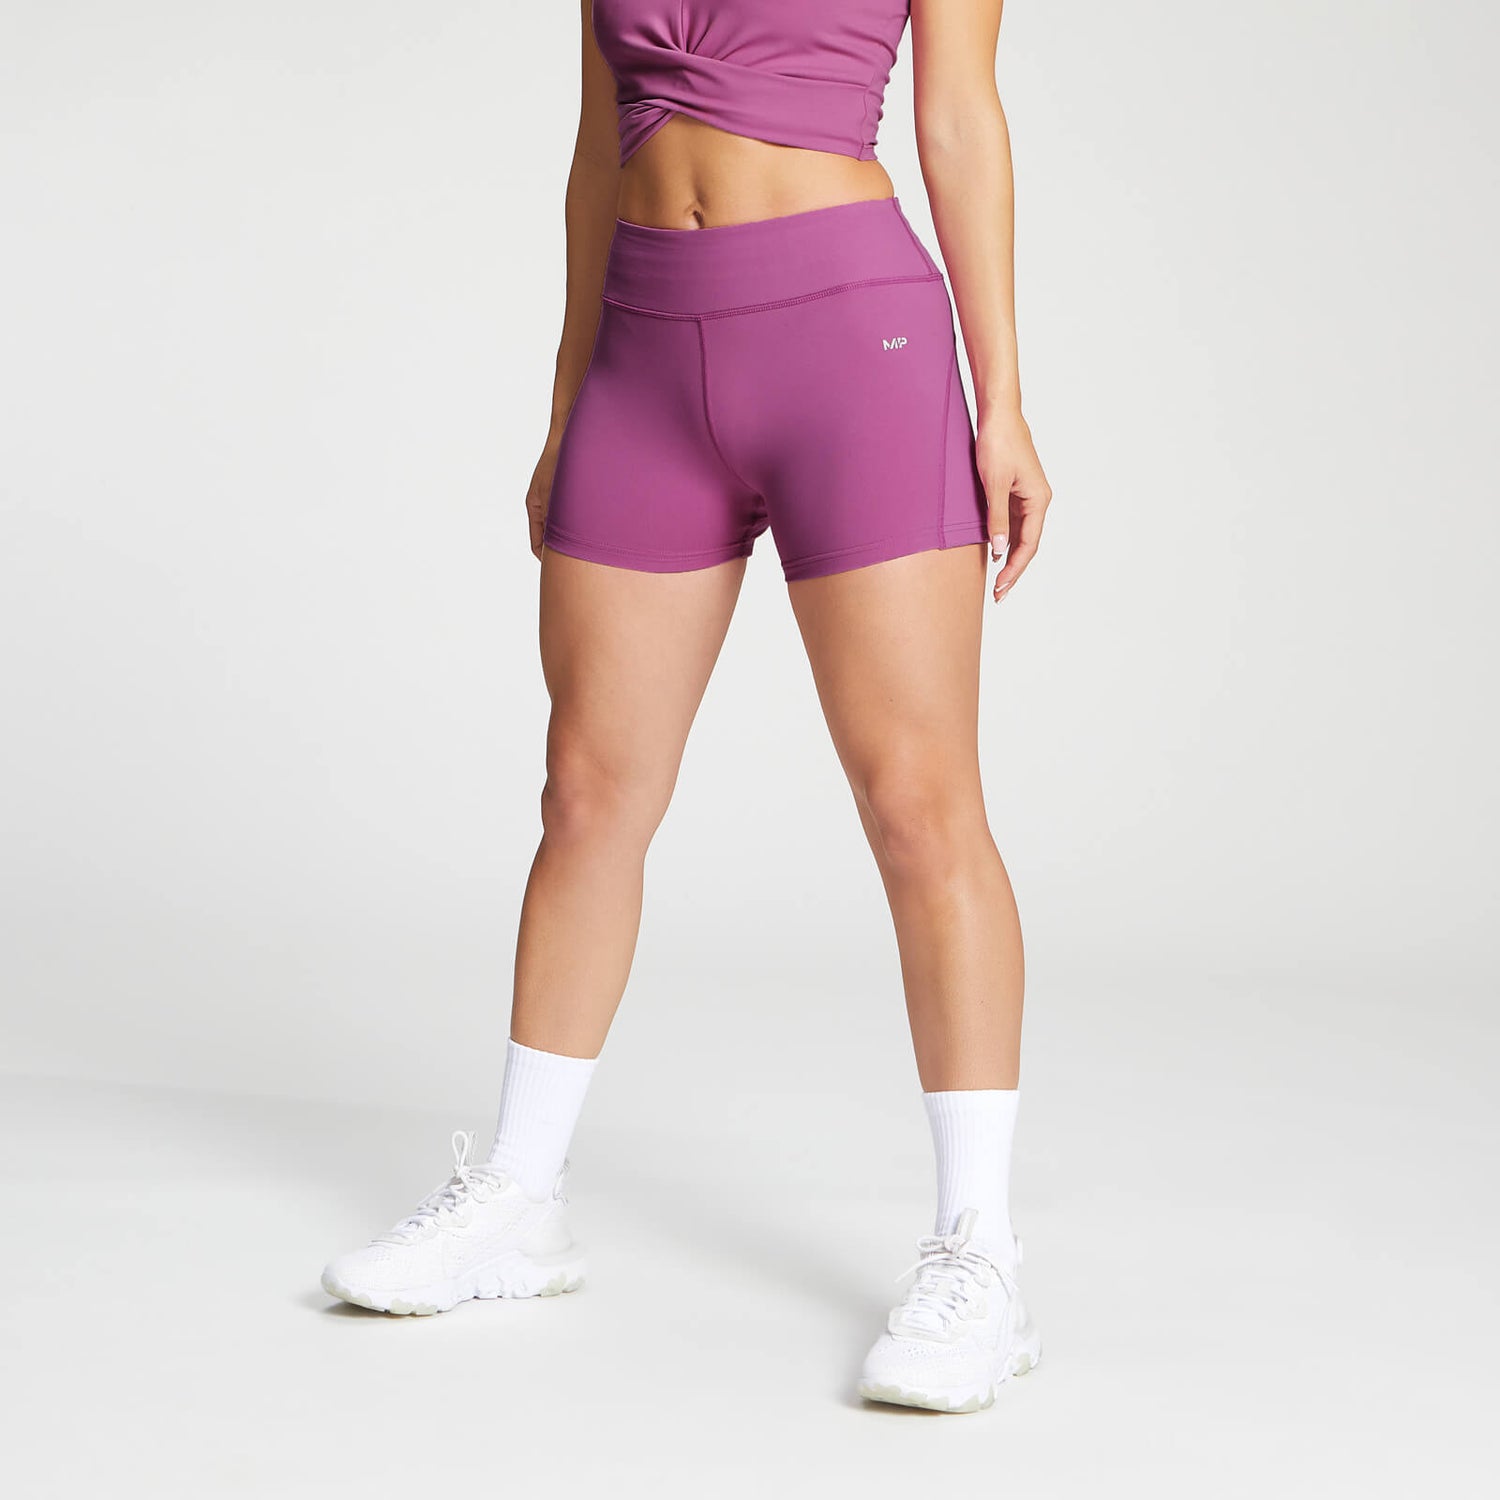 MP Vrouwen Power Booty Shorts - Orchidee - S